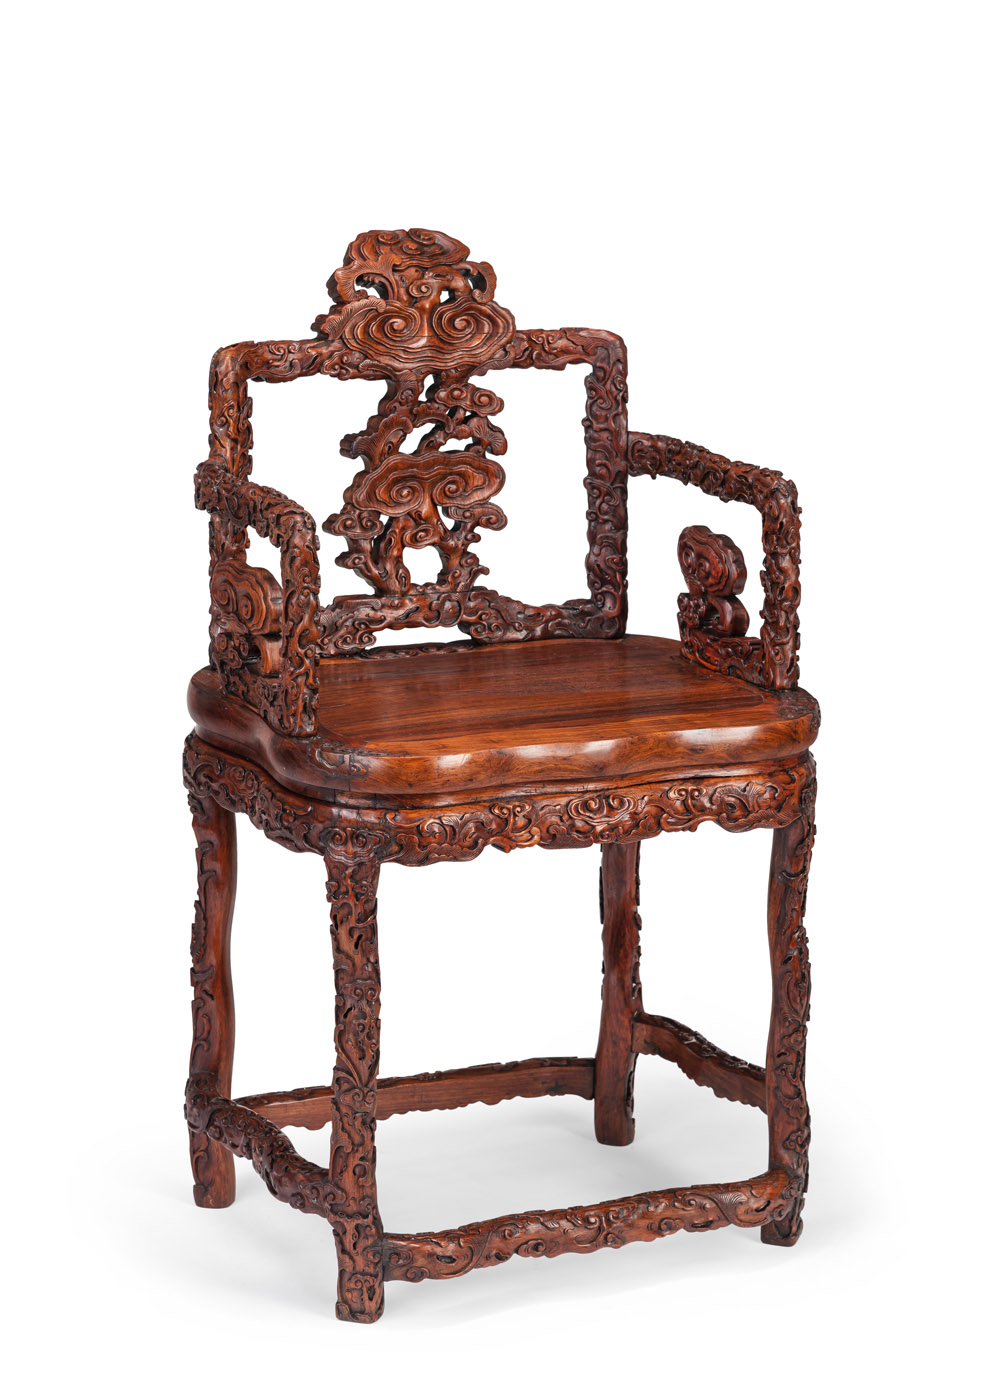 <b>A RARE AND  FINELY CARVED 'LINGZHI' MUSHROOMS ARMCHAIR</b>